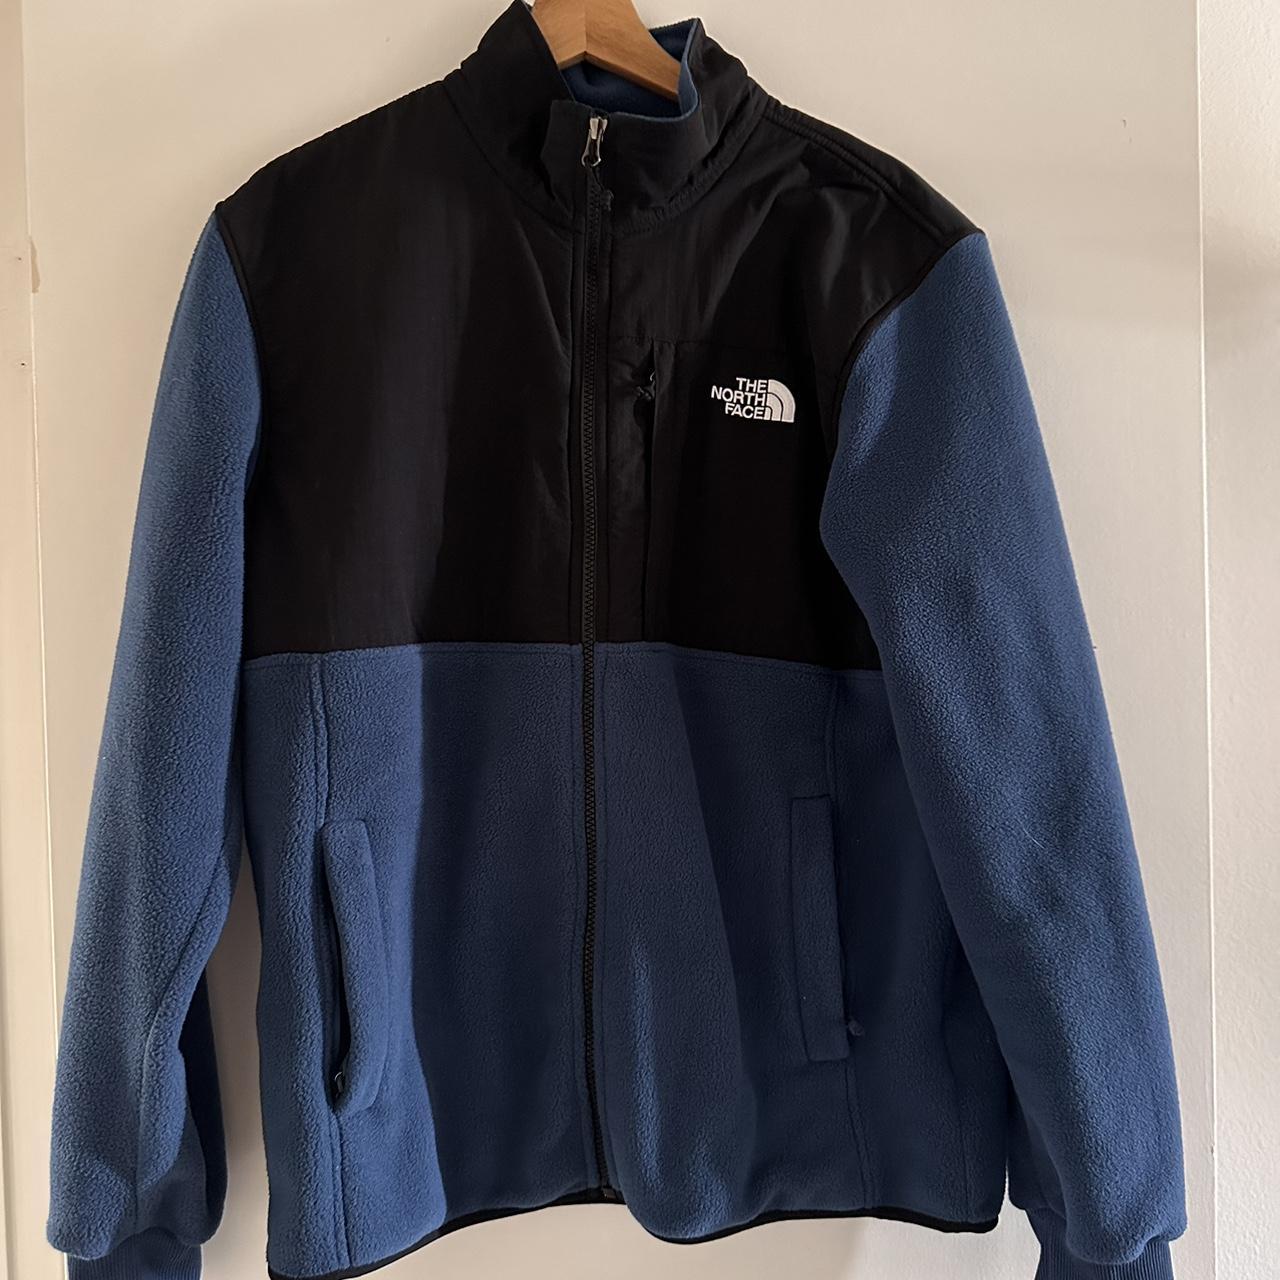 The North Face Men's Blue and Black Jacket